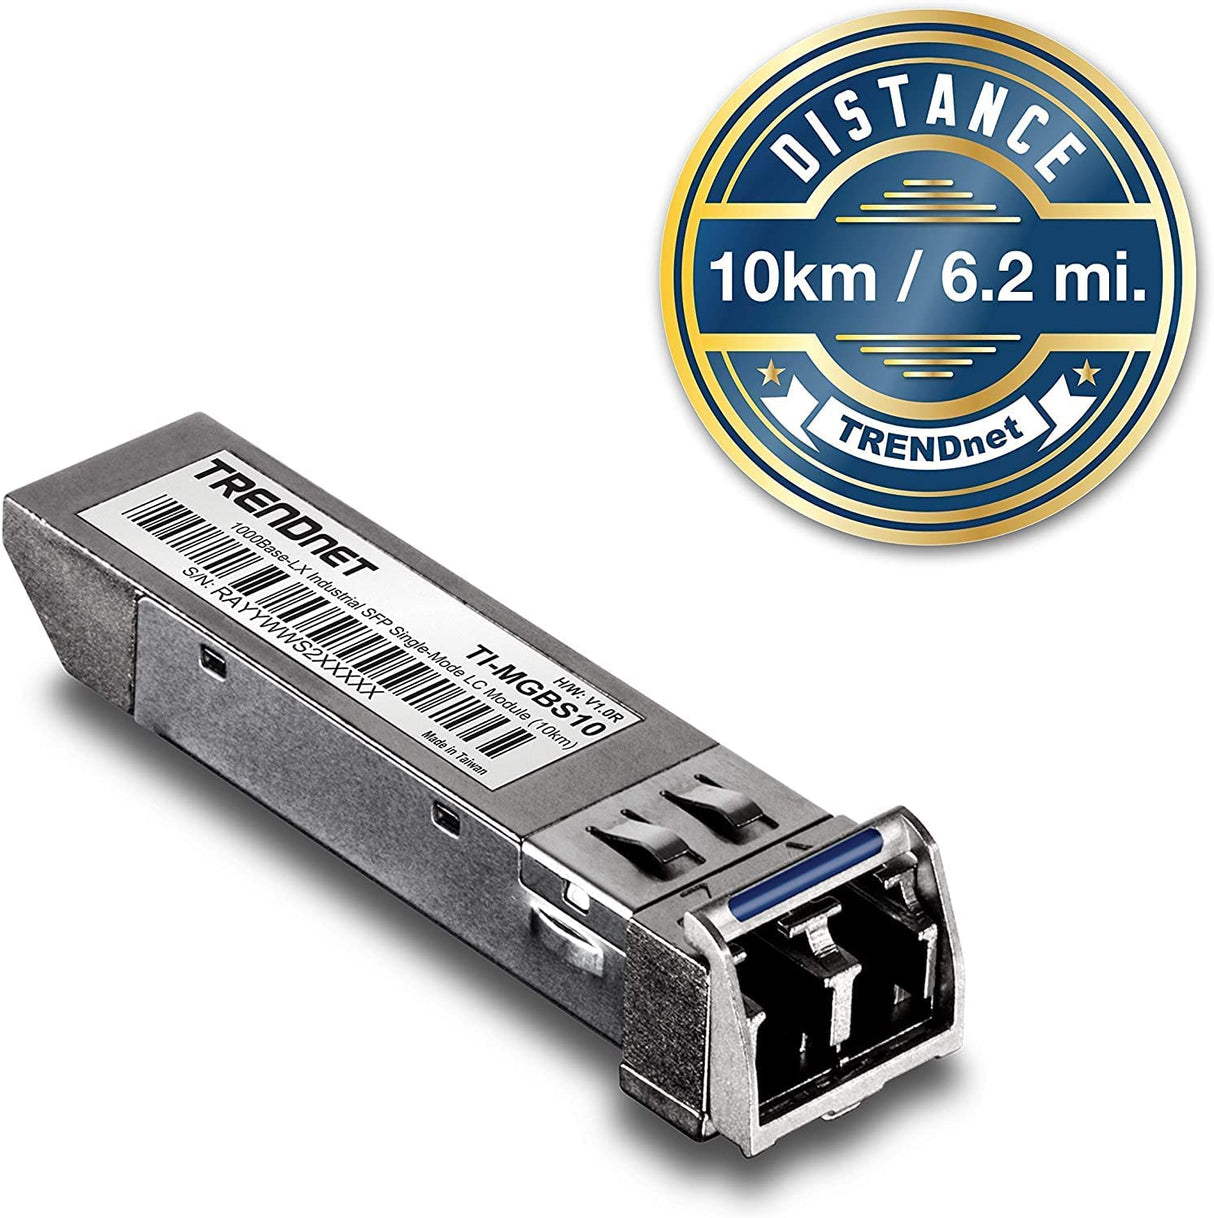 TRENDnet SFP to RJ45 Industrial Single-Mode LC Module (10km), TI-MGBS10, 1000Base-LX Industrial SFP, Compliant with IEEE 802.3z Gigabit Ethernet, Data Rates of up to 1.25Gbps, Lifetime Protection 10 KM